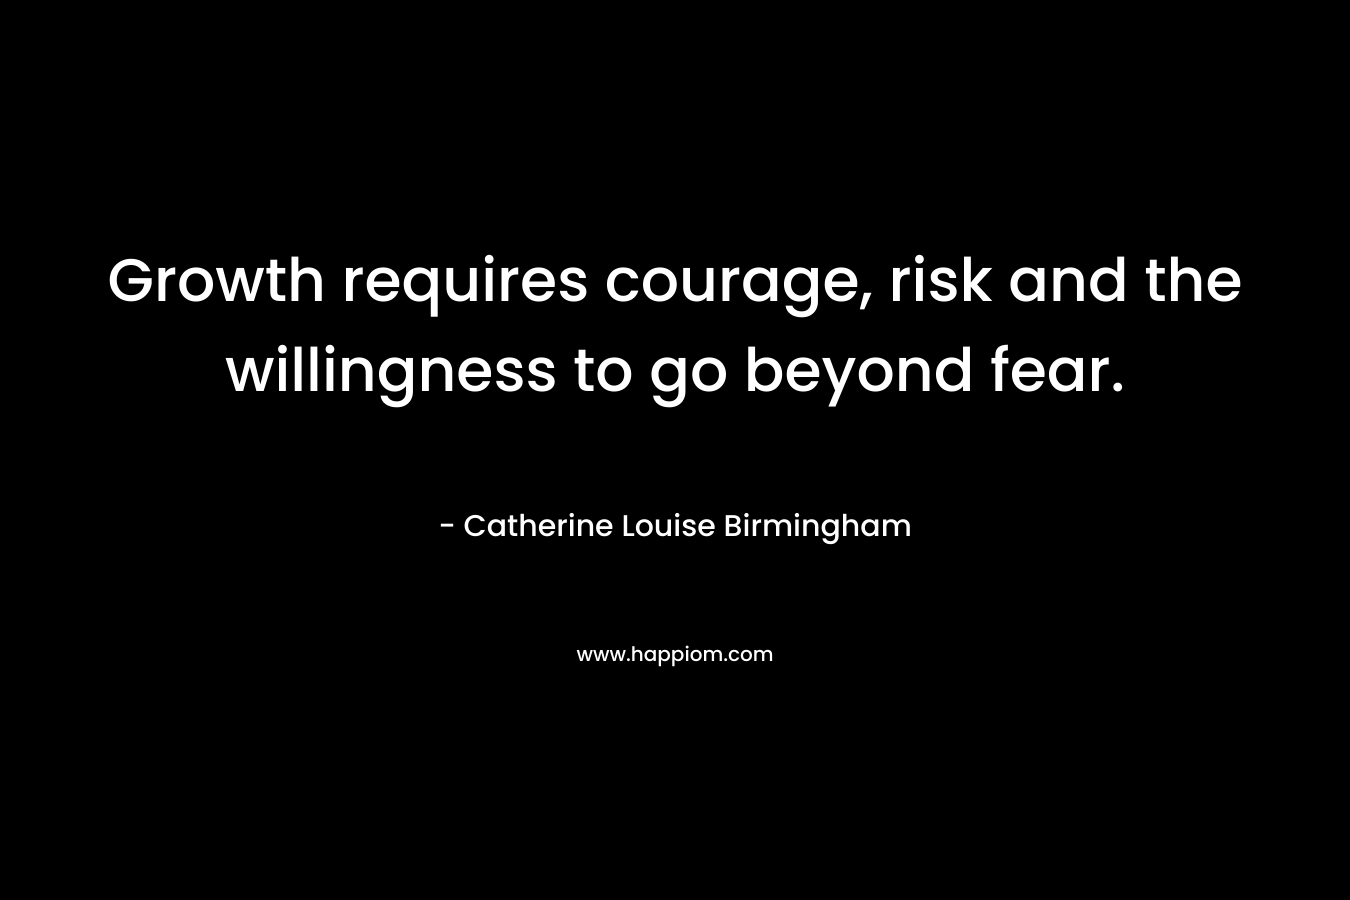 Growth requires courage, risk and the willingness to go beyond fear. – Catherine Louise Birmingham